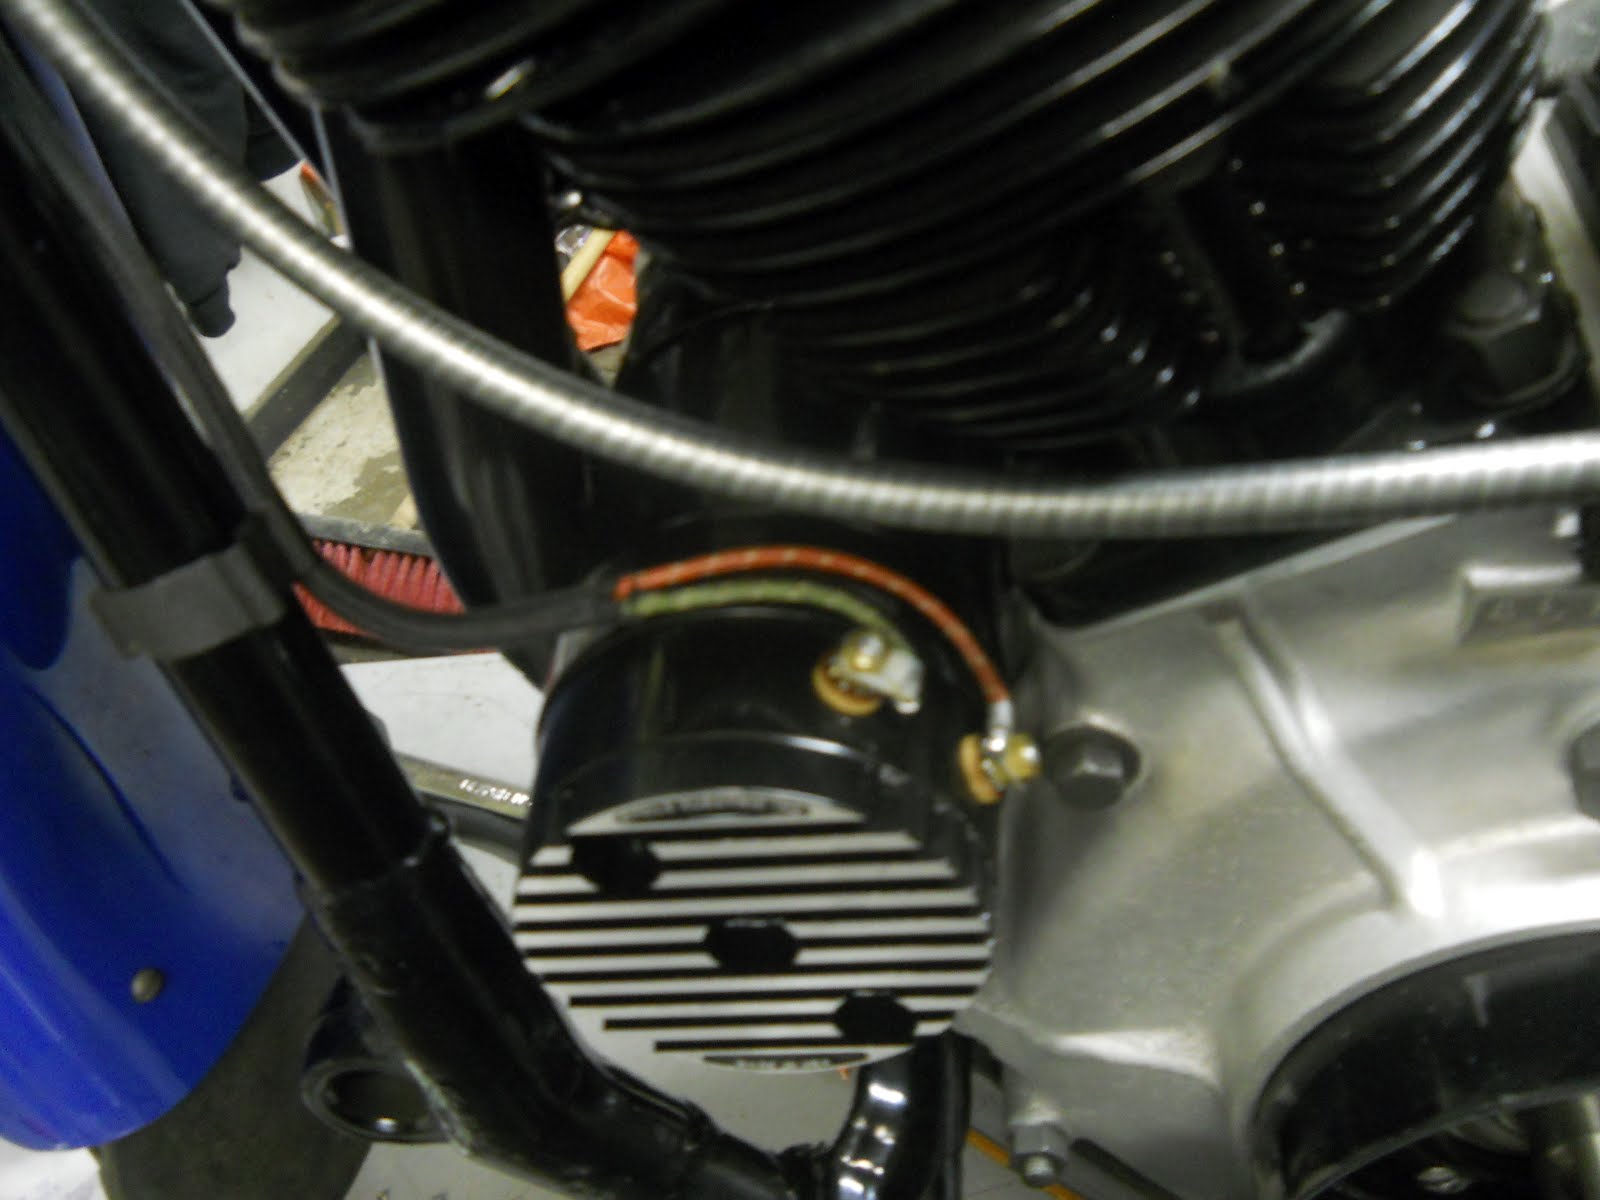 Matt Olsen's Blog: chino bike almost switched over and 1946 knucklehead